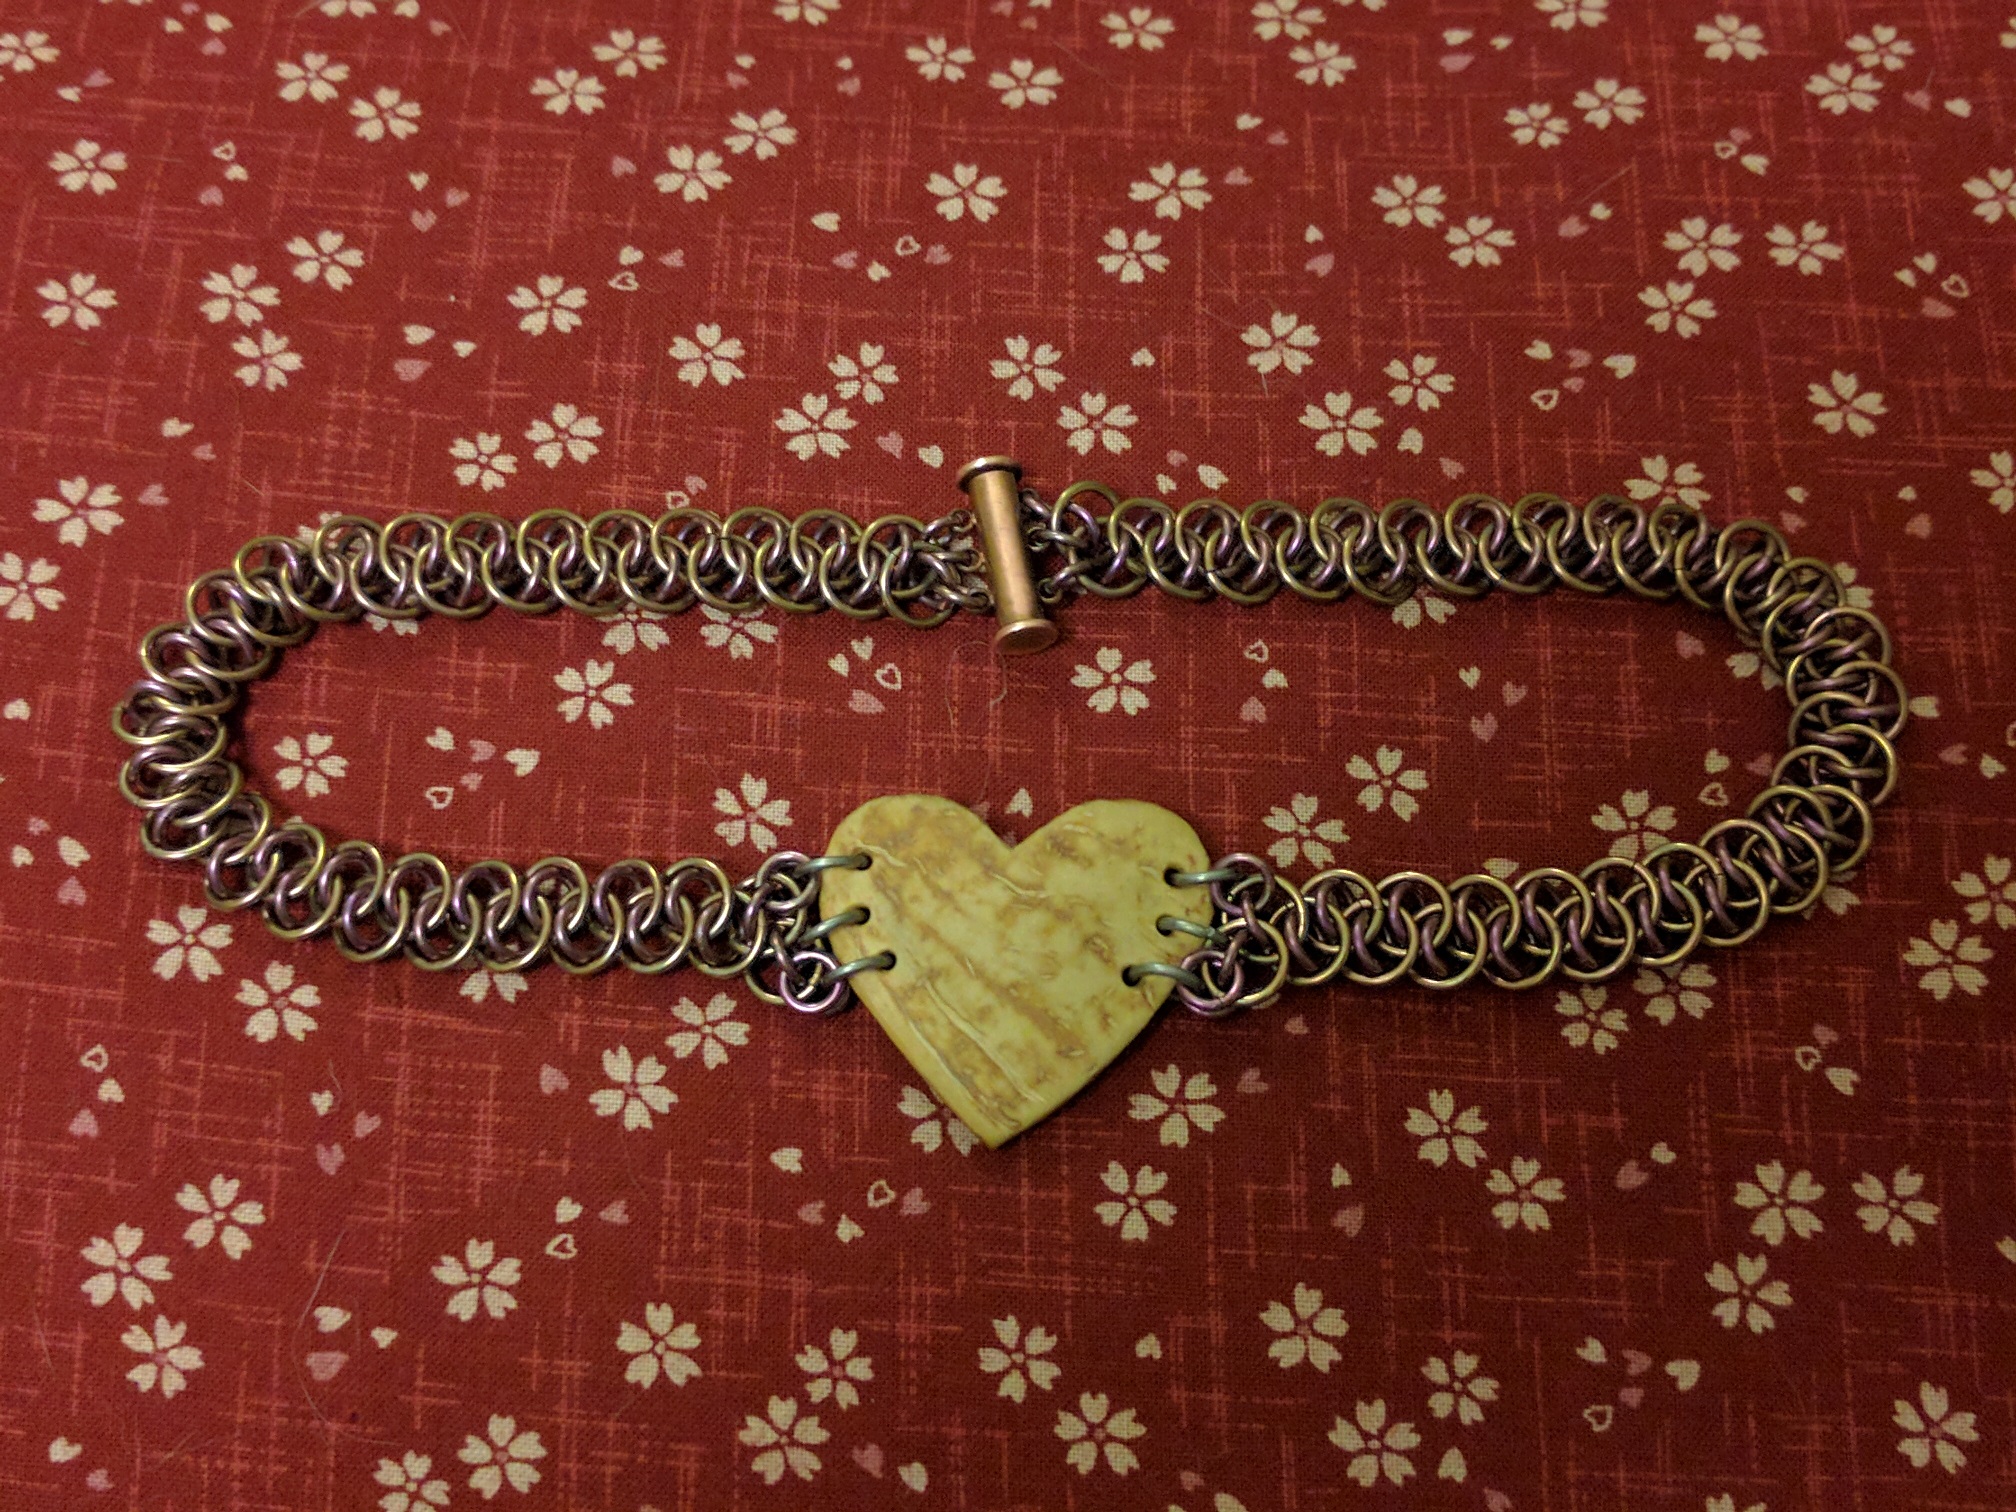 The heart pendant, attached to the chainmaille collar, sitting on a sakura pattern burgundy bed.